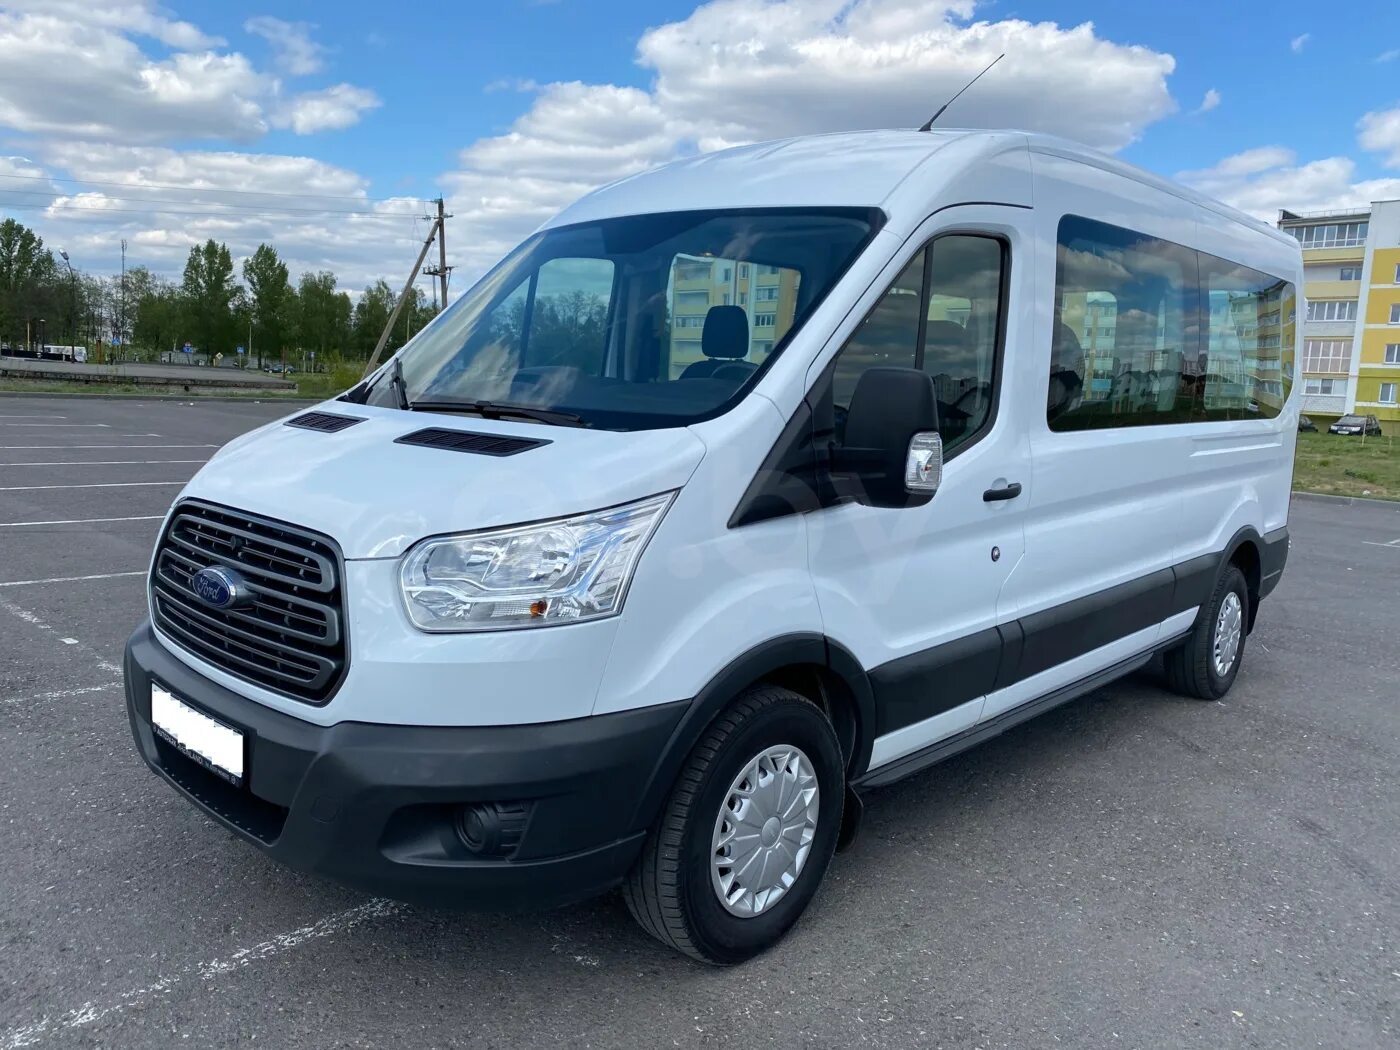 Ford Transit Maxi. Форд Транзит макси. Форд Транзит макси база. Форд Транзит макси 2002 год.